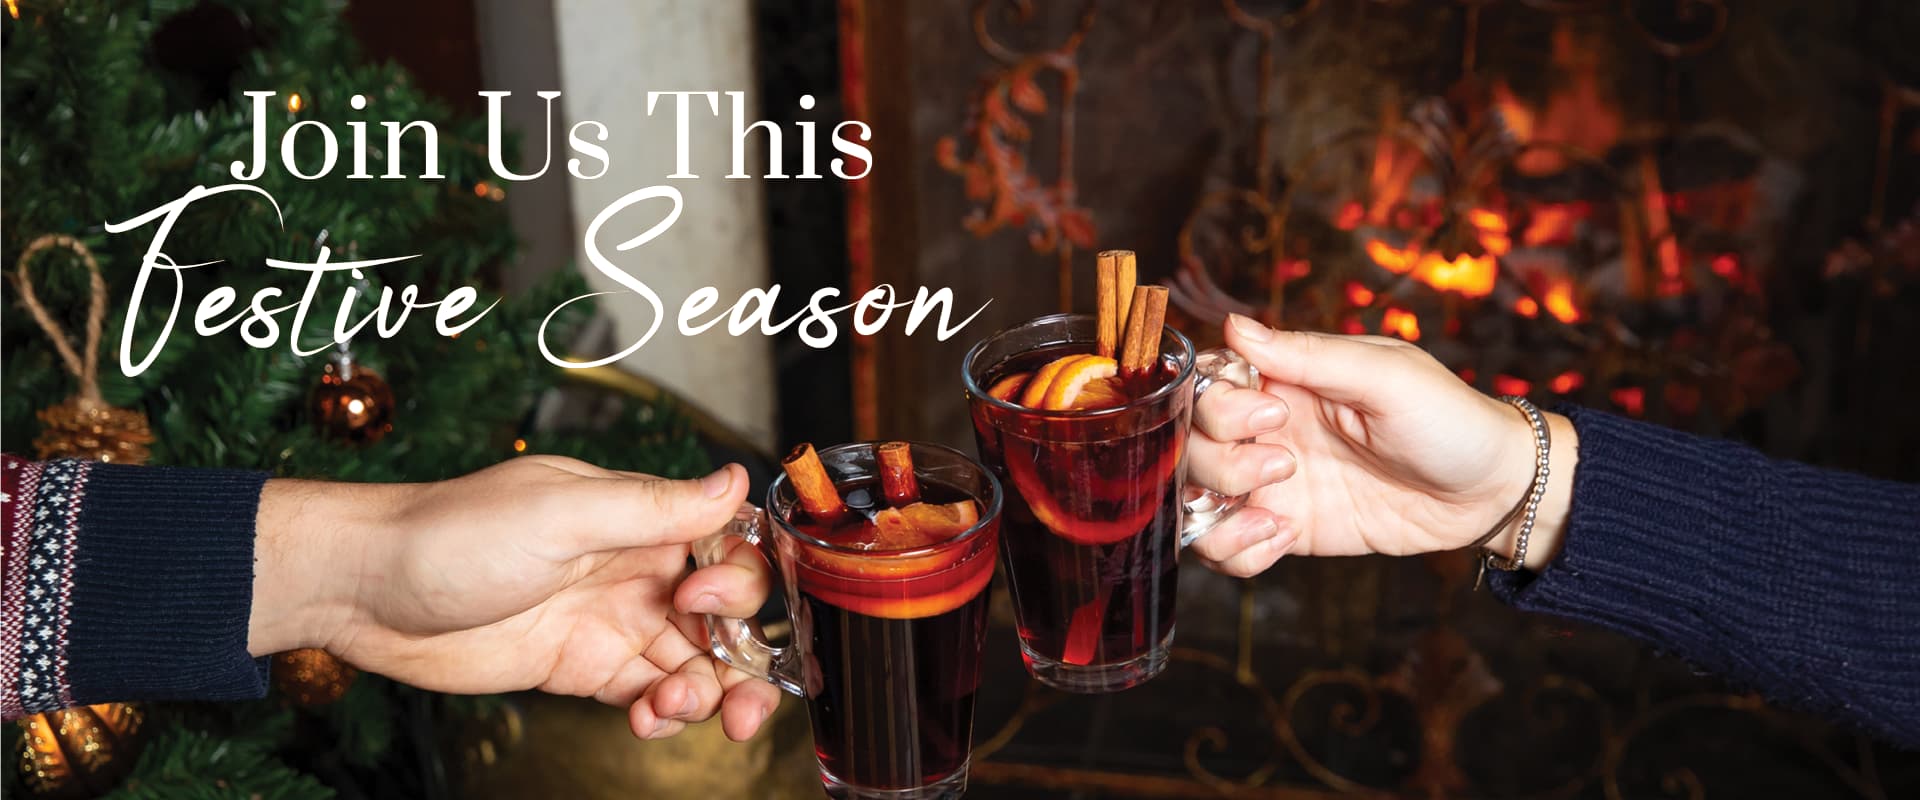 join us this festive season at Farmhouse | Mulled Wine